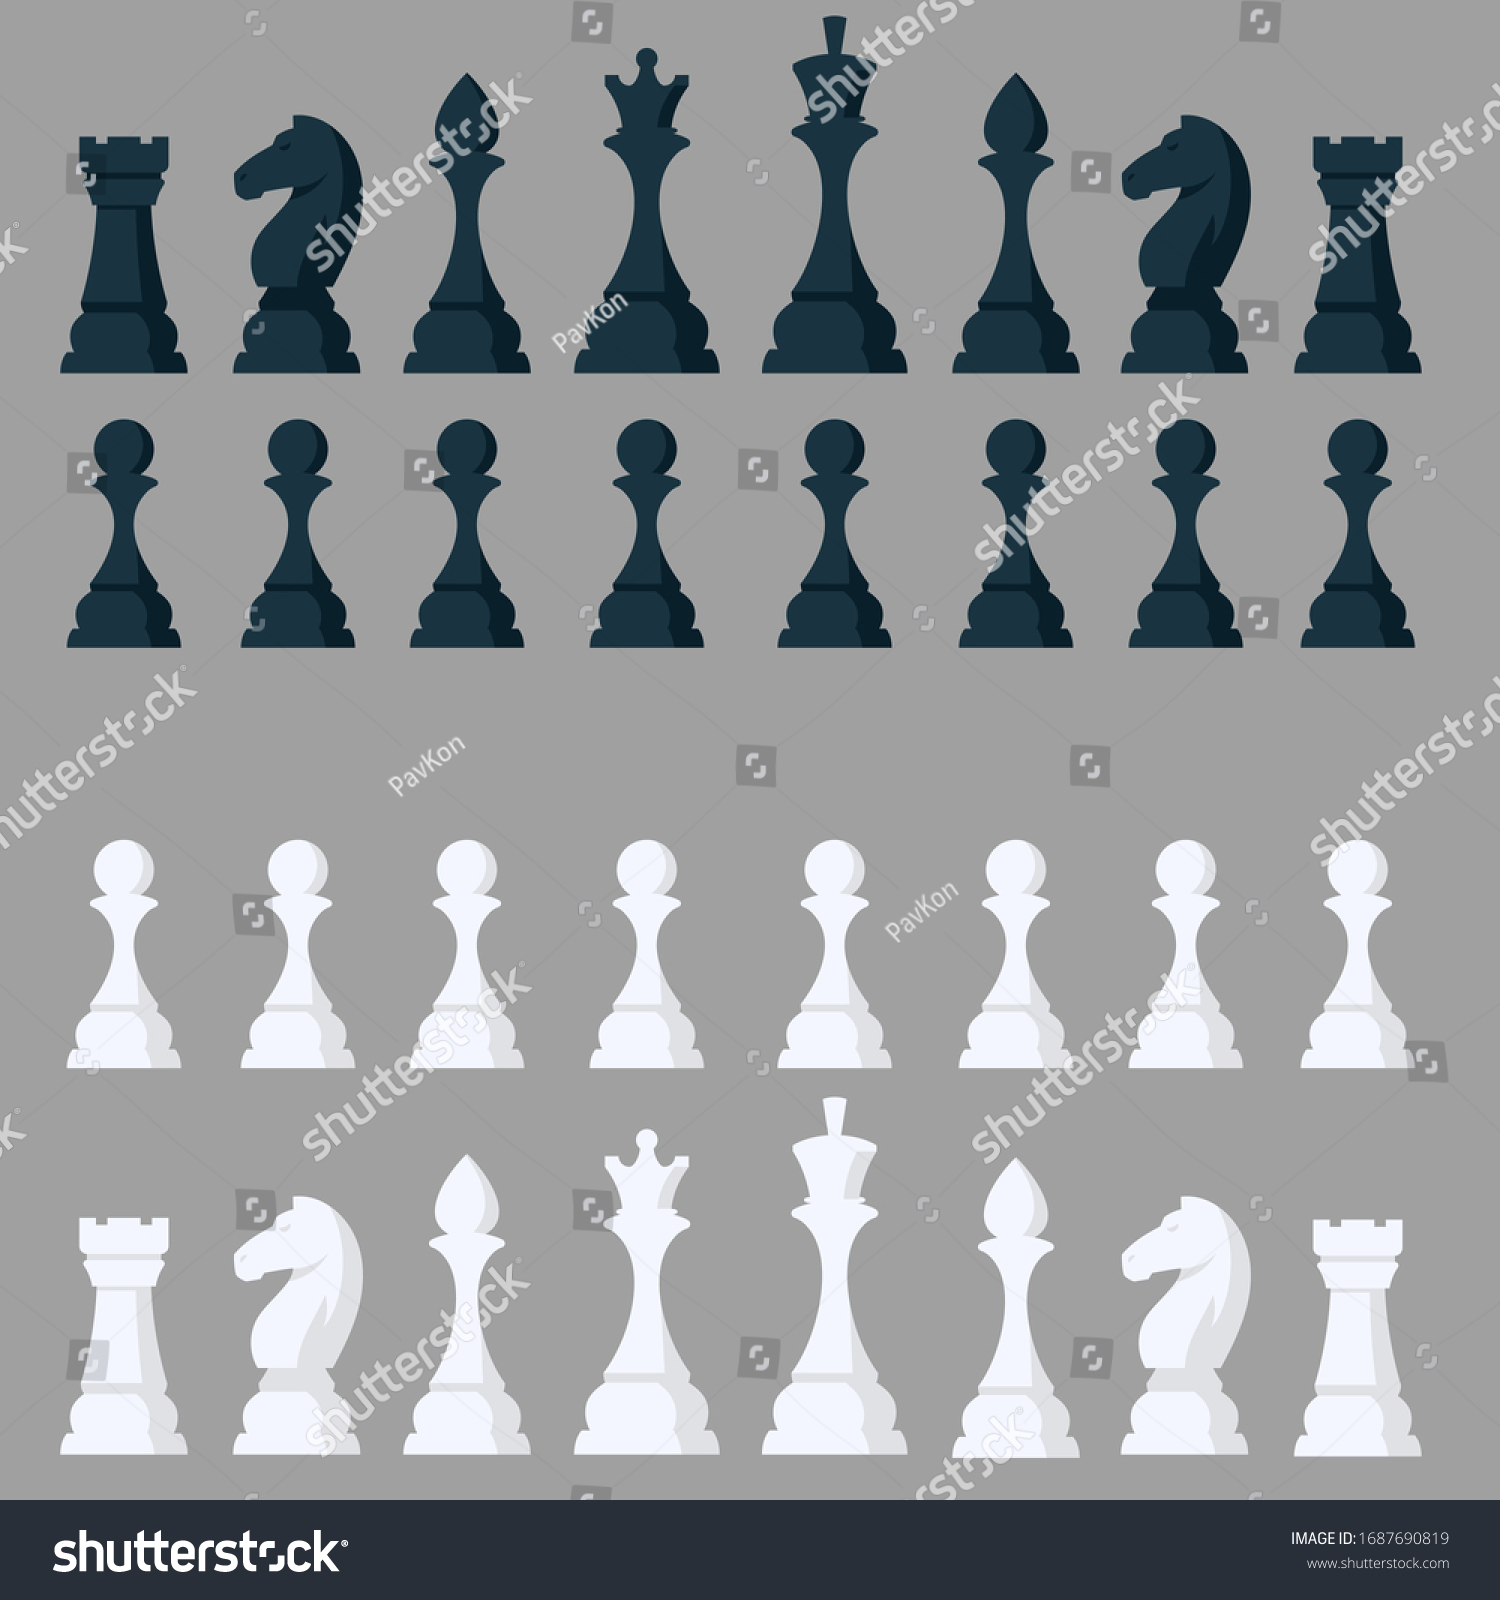 SVG of Set of all chess pieces. Black and white objects in cartoon style. svg